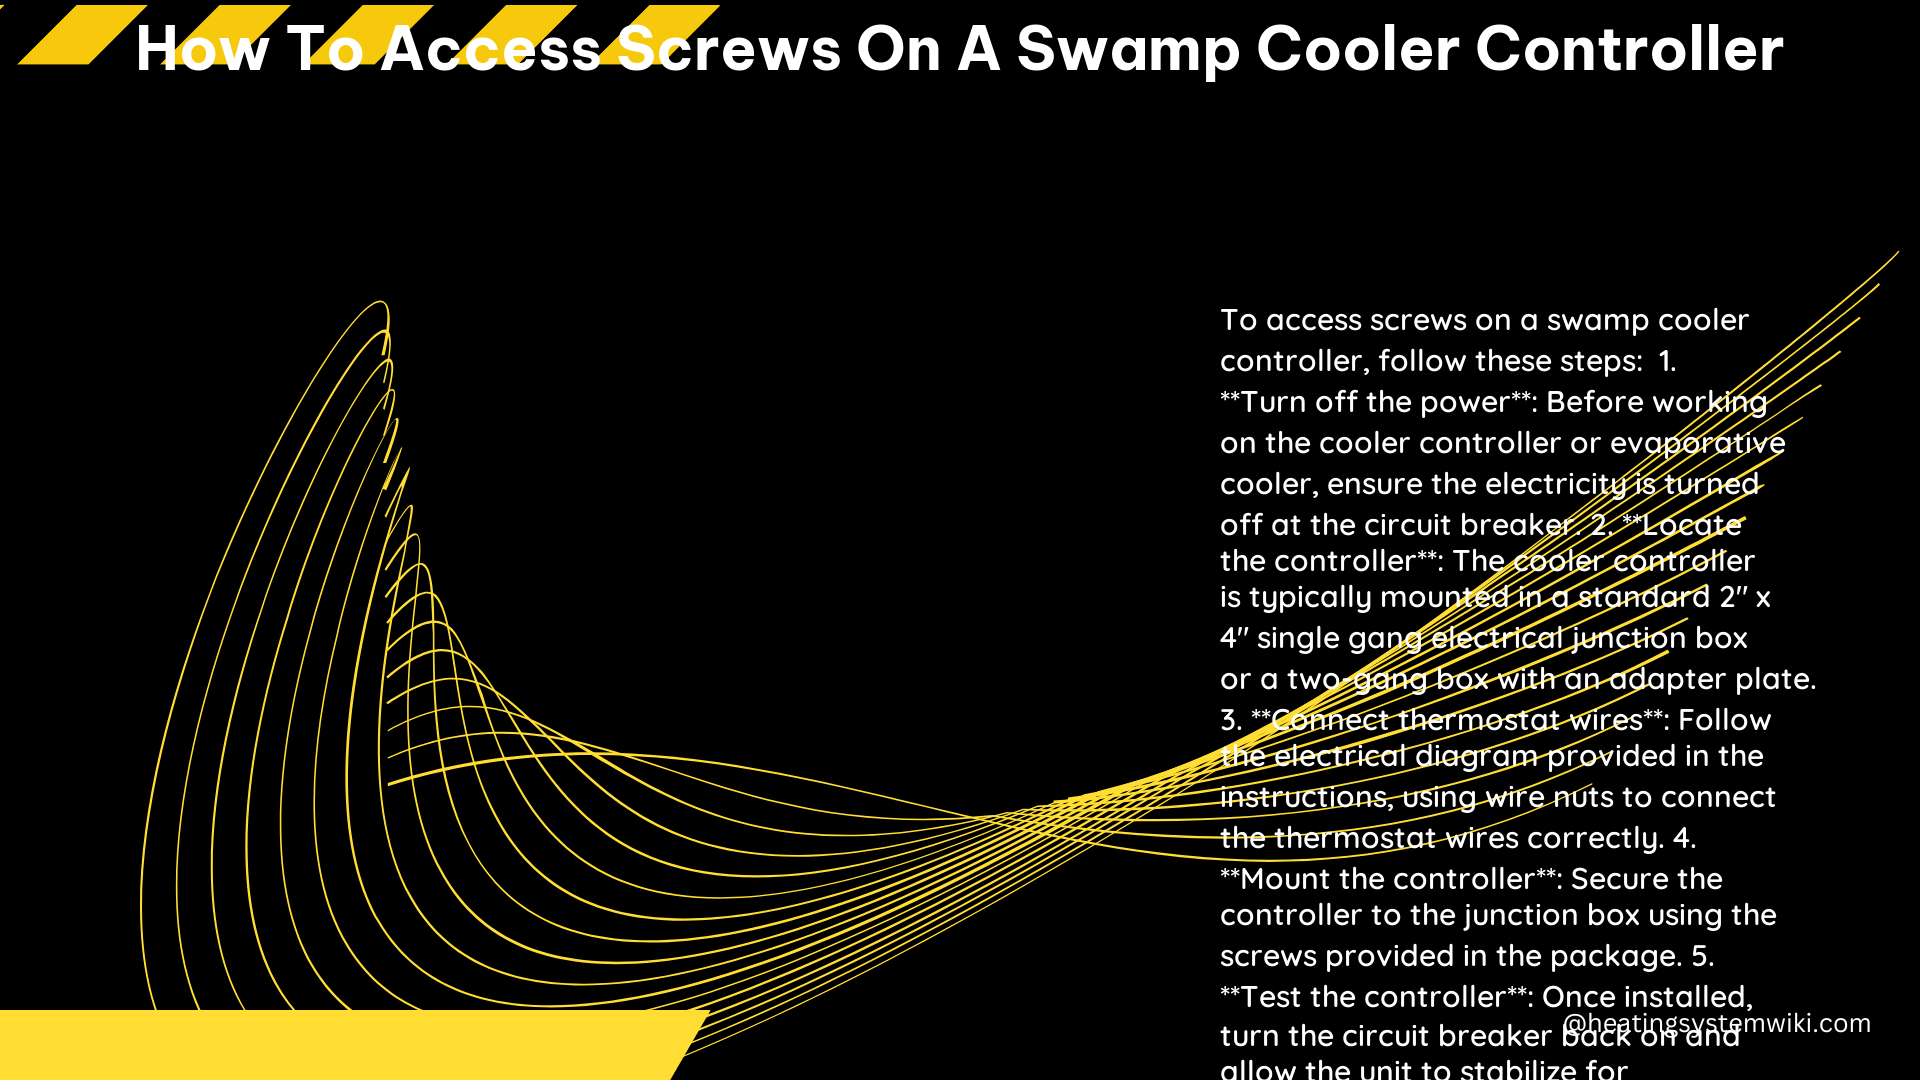 How to Access Screws on a Swamp Cooler Controller